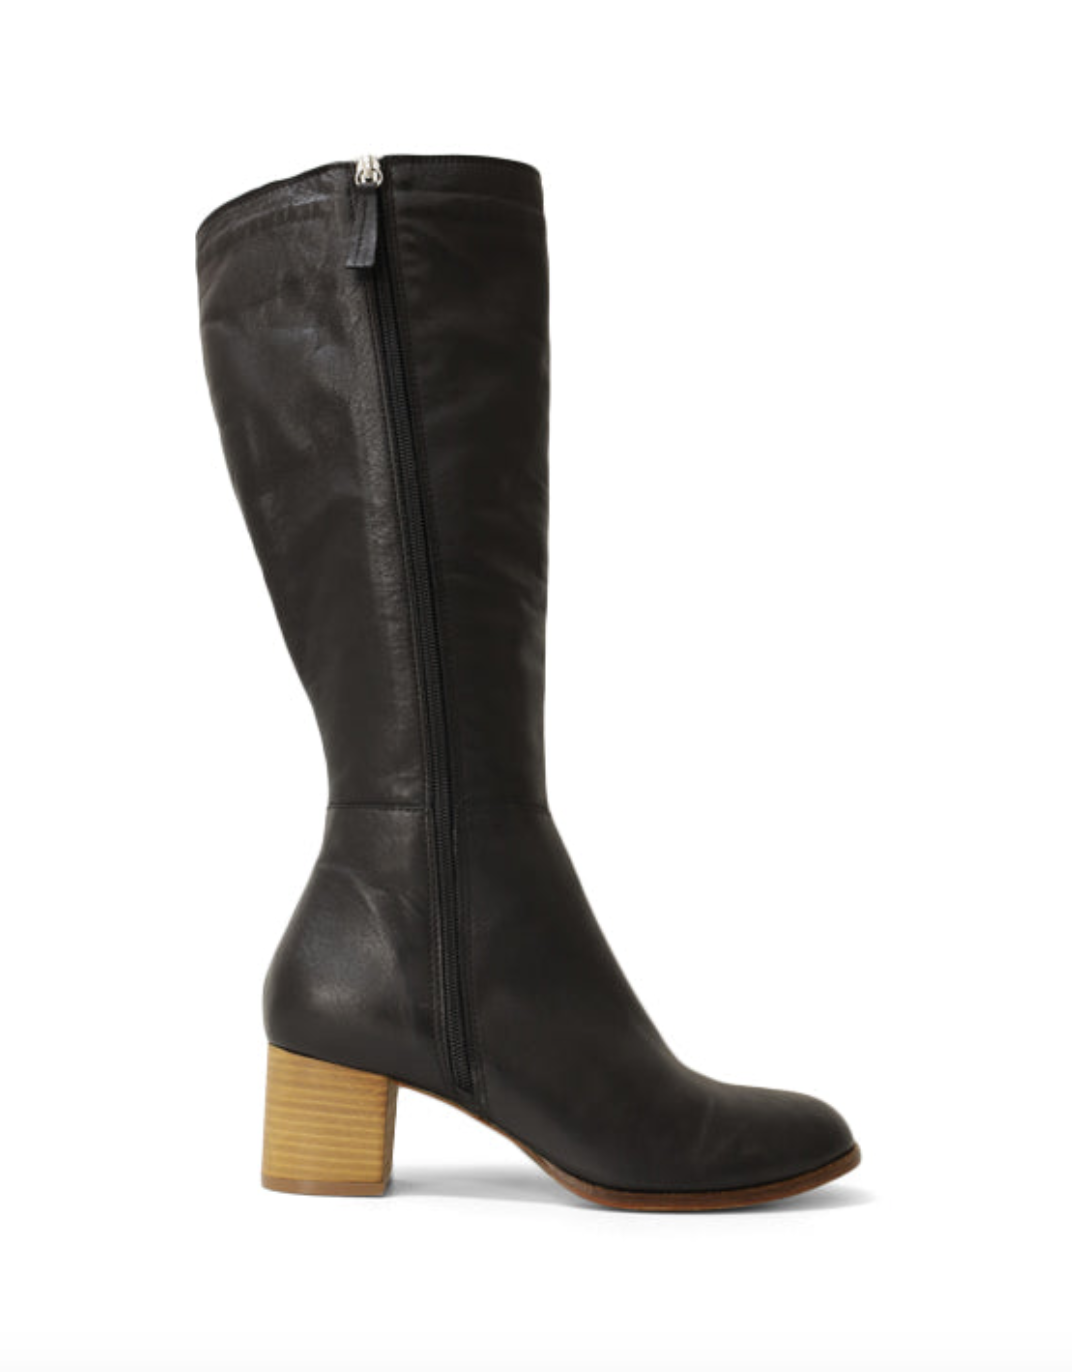 Bueno Emily Long Boots - black side view